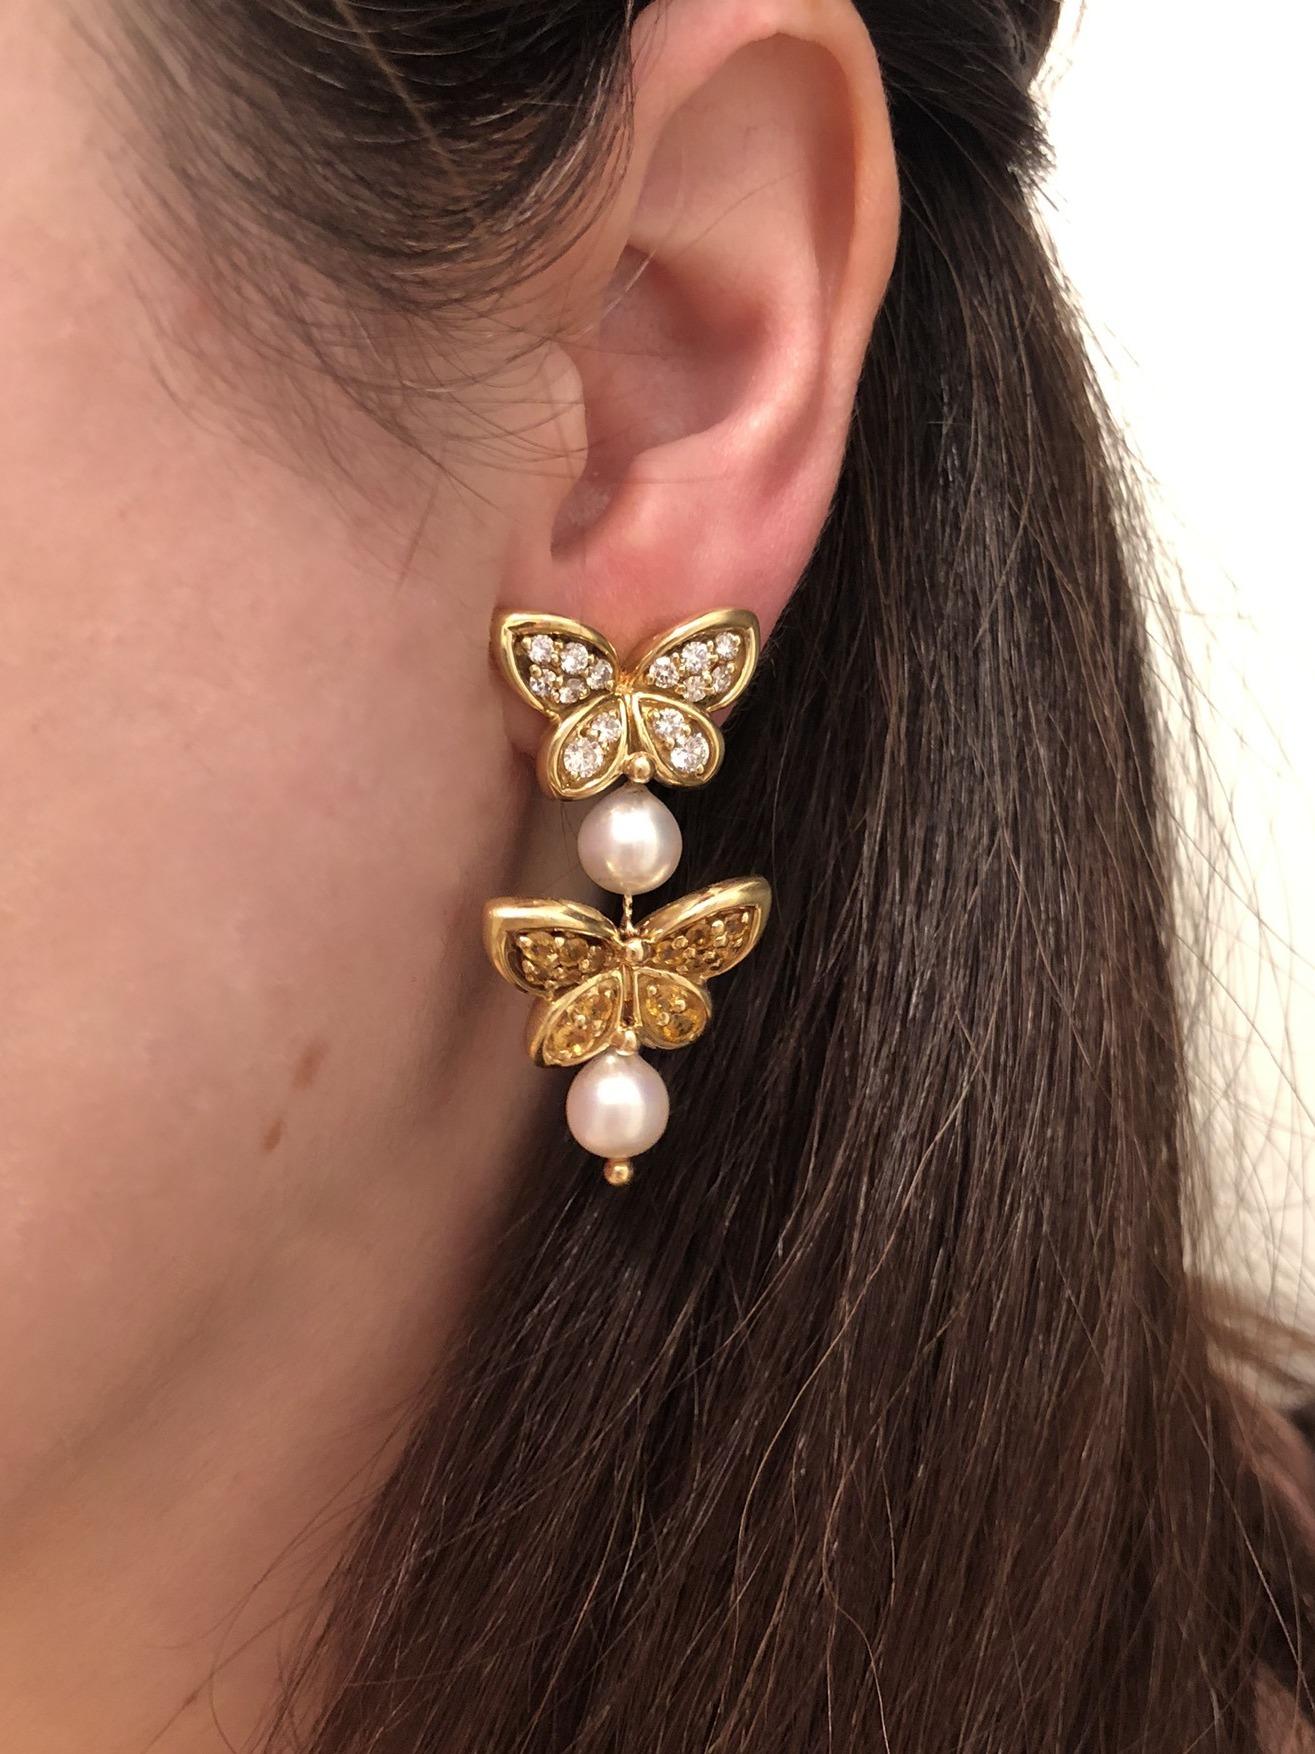 These Van Cleef & Arpels 18K yellow gold earrings of a butterfly motif have 28 diamonds, totaling approximately 1.70 carats, and 28 yellow sapphires totaling approximately 3 carats, and 4 cultured pearls. The last year of production for this model